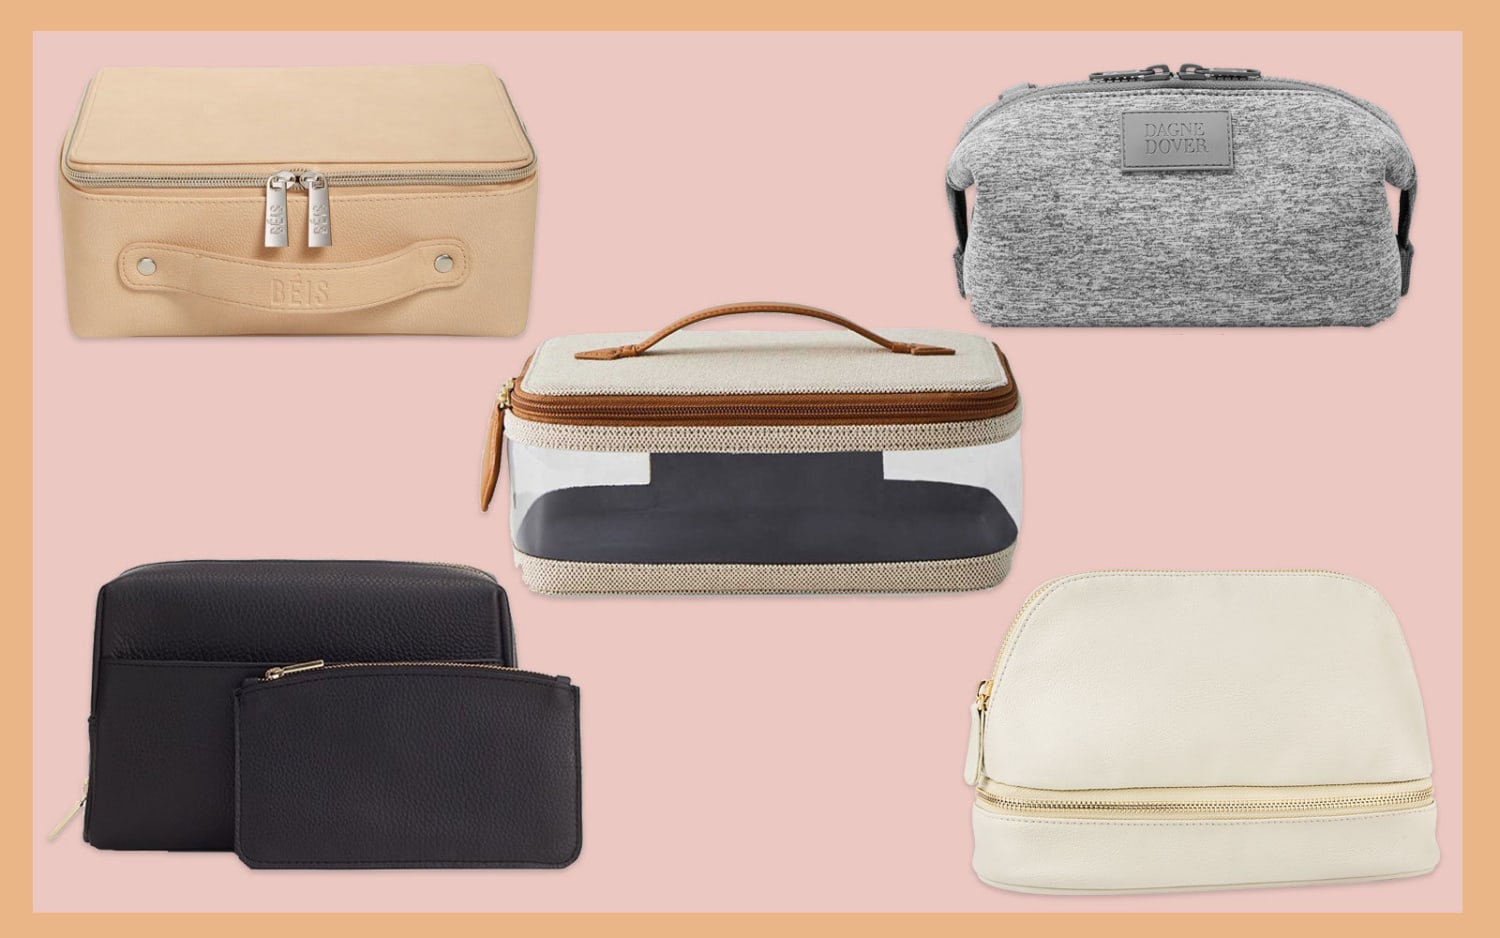 The 19 Best Travel Makeup Bags to Pack on Your Next Trip